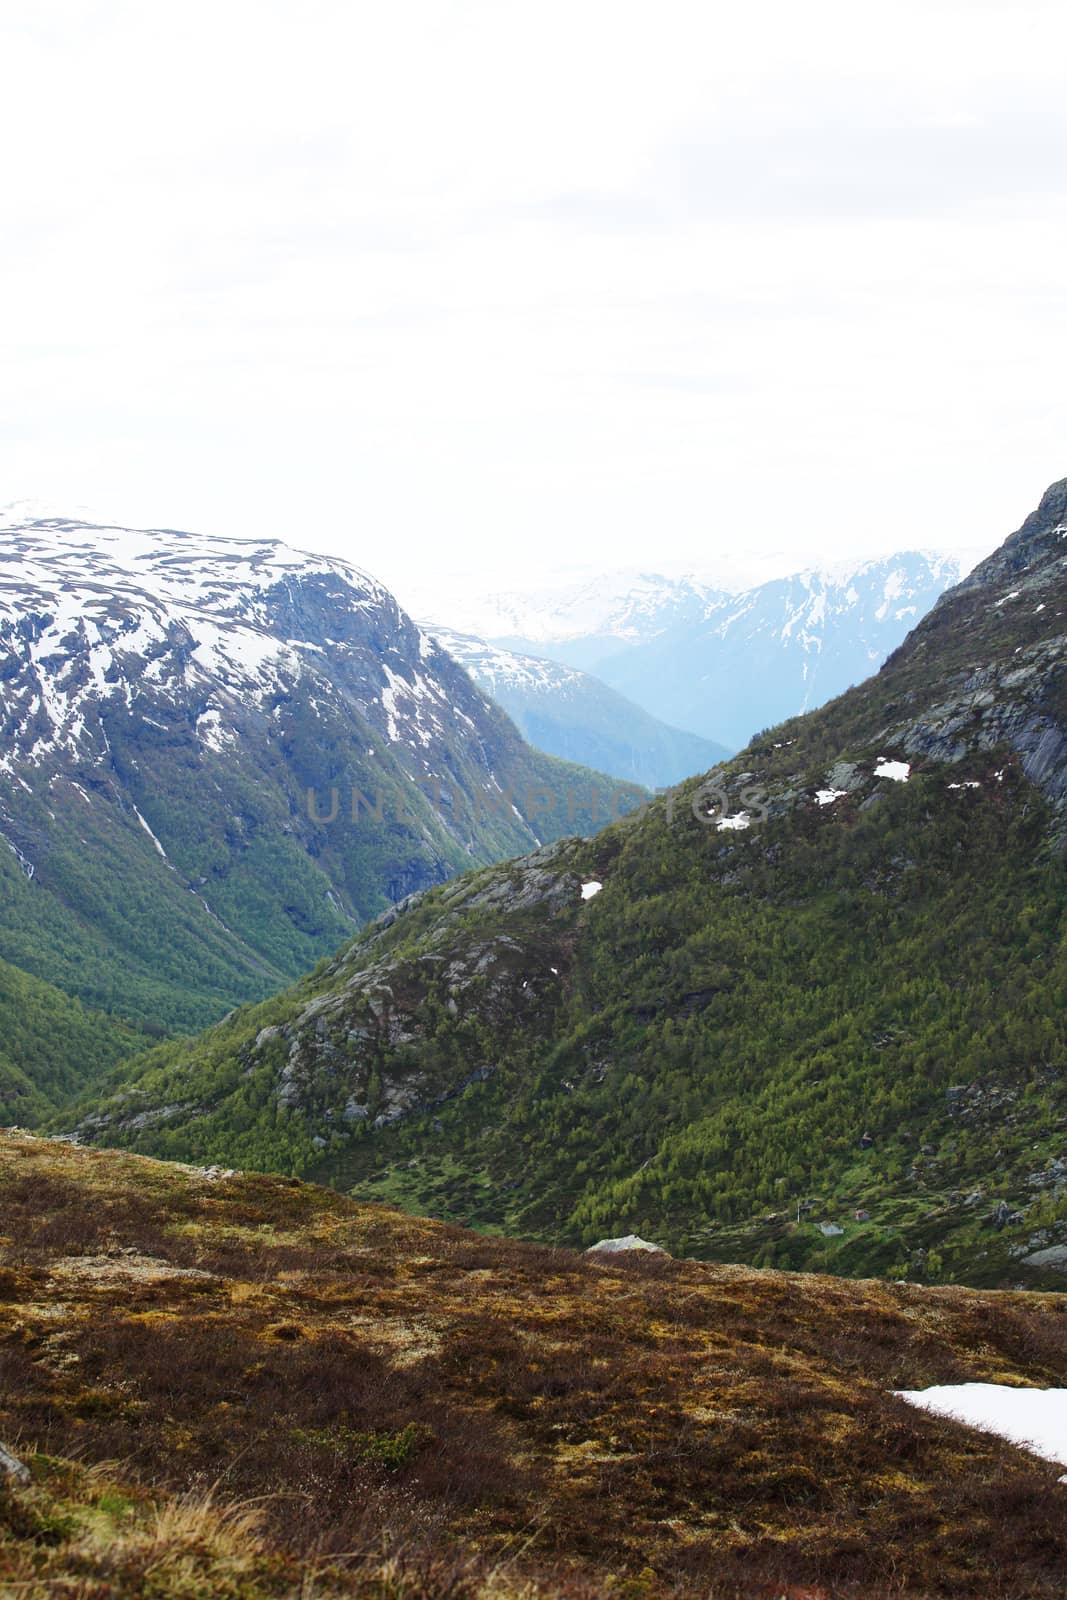 Beautiful spring Norway mountains with melting snow on tops